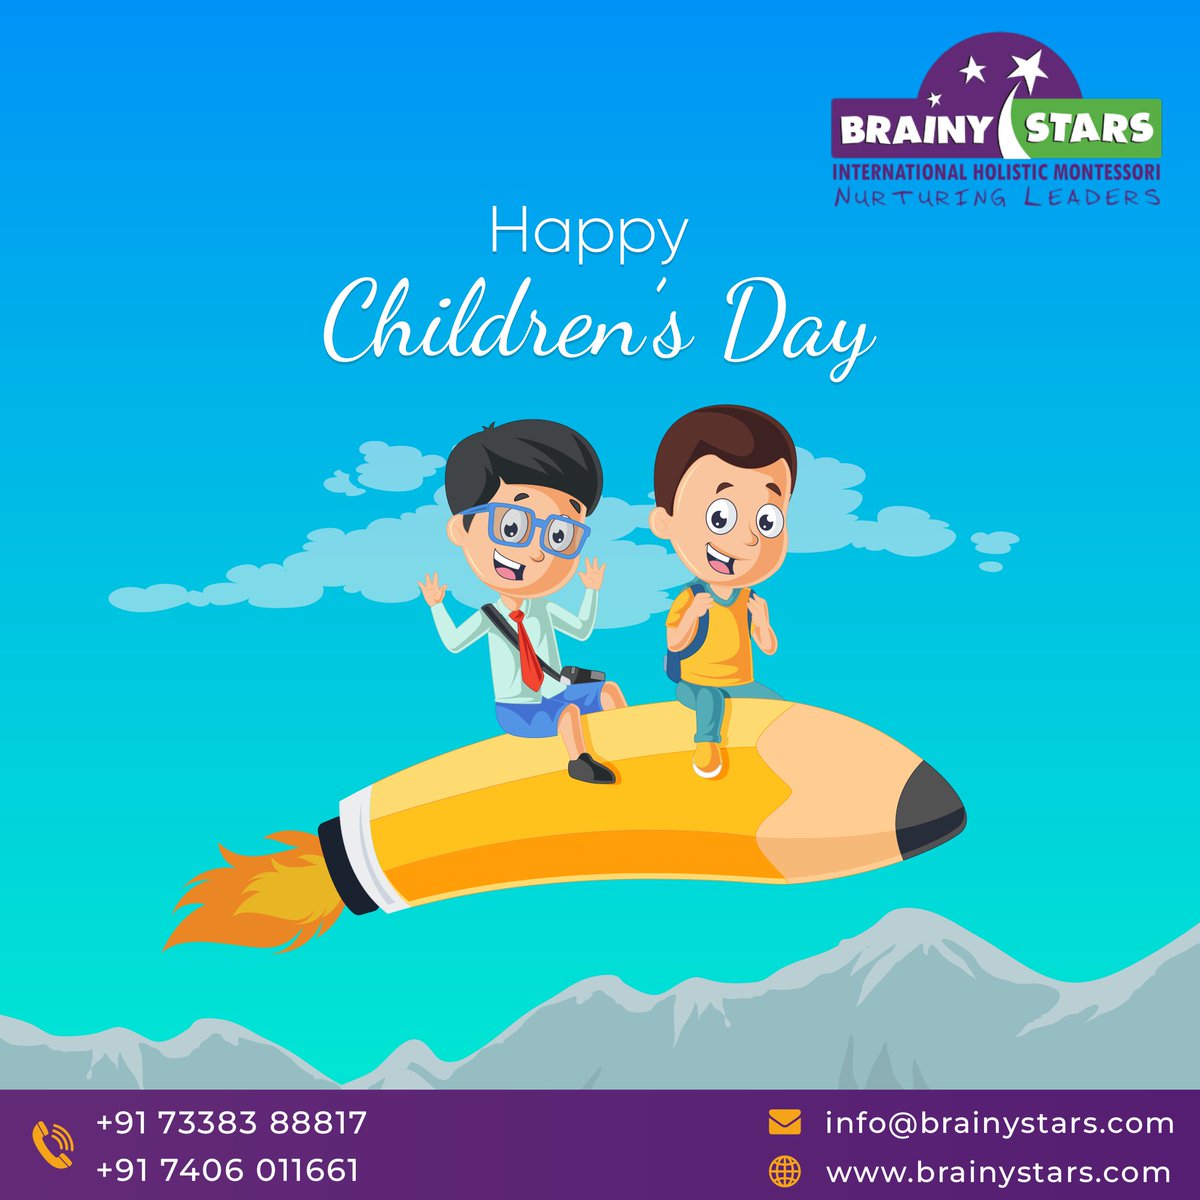 Today’s children are tomorrow’s scientists, doctors, lawyers, police, and other professionals. 

#HappyChildrensDay #ChildrenAreTheFuture #HealthyProsperousEducatedWise #ChildrensDayWishes #CelebrateChildhood #FutureProfessionals #HappyChildrensDay2023 #HealthyEducatedWise